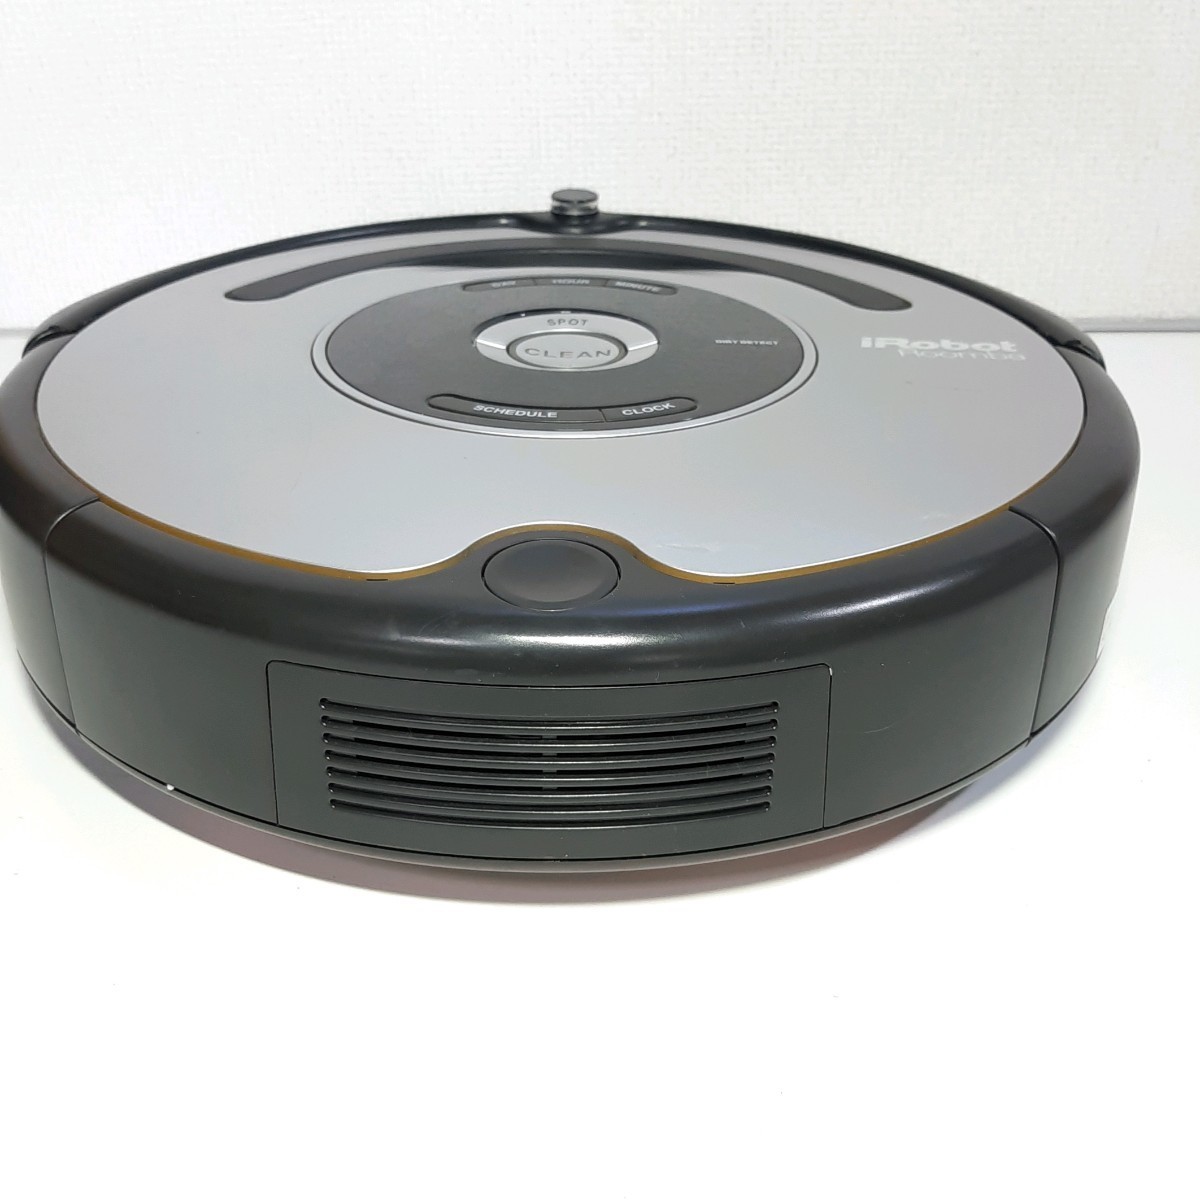 iRobot Roomba 570J I robot roomba 570J automatic vacuum cleaner junk treatment present condition delivery goods 